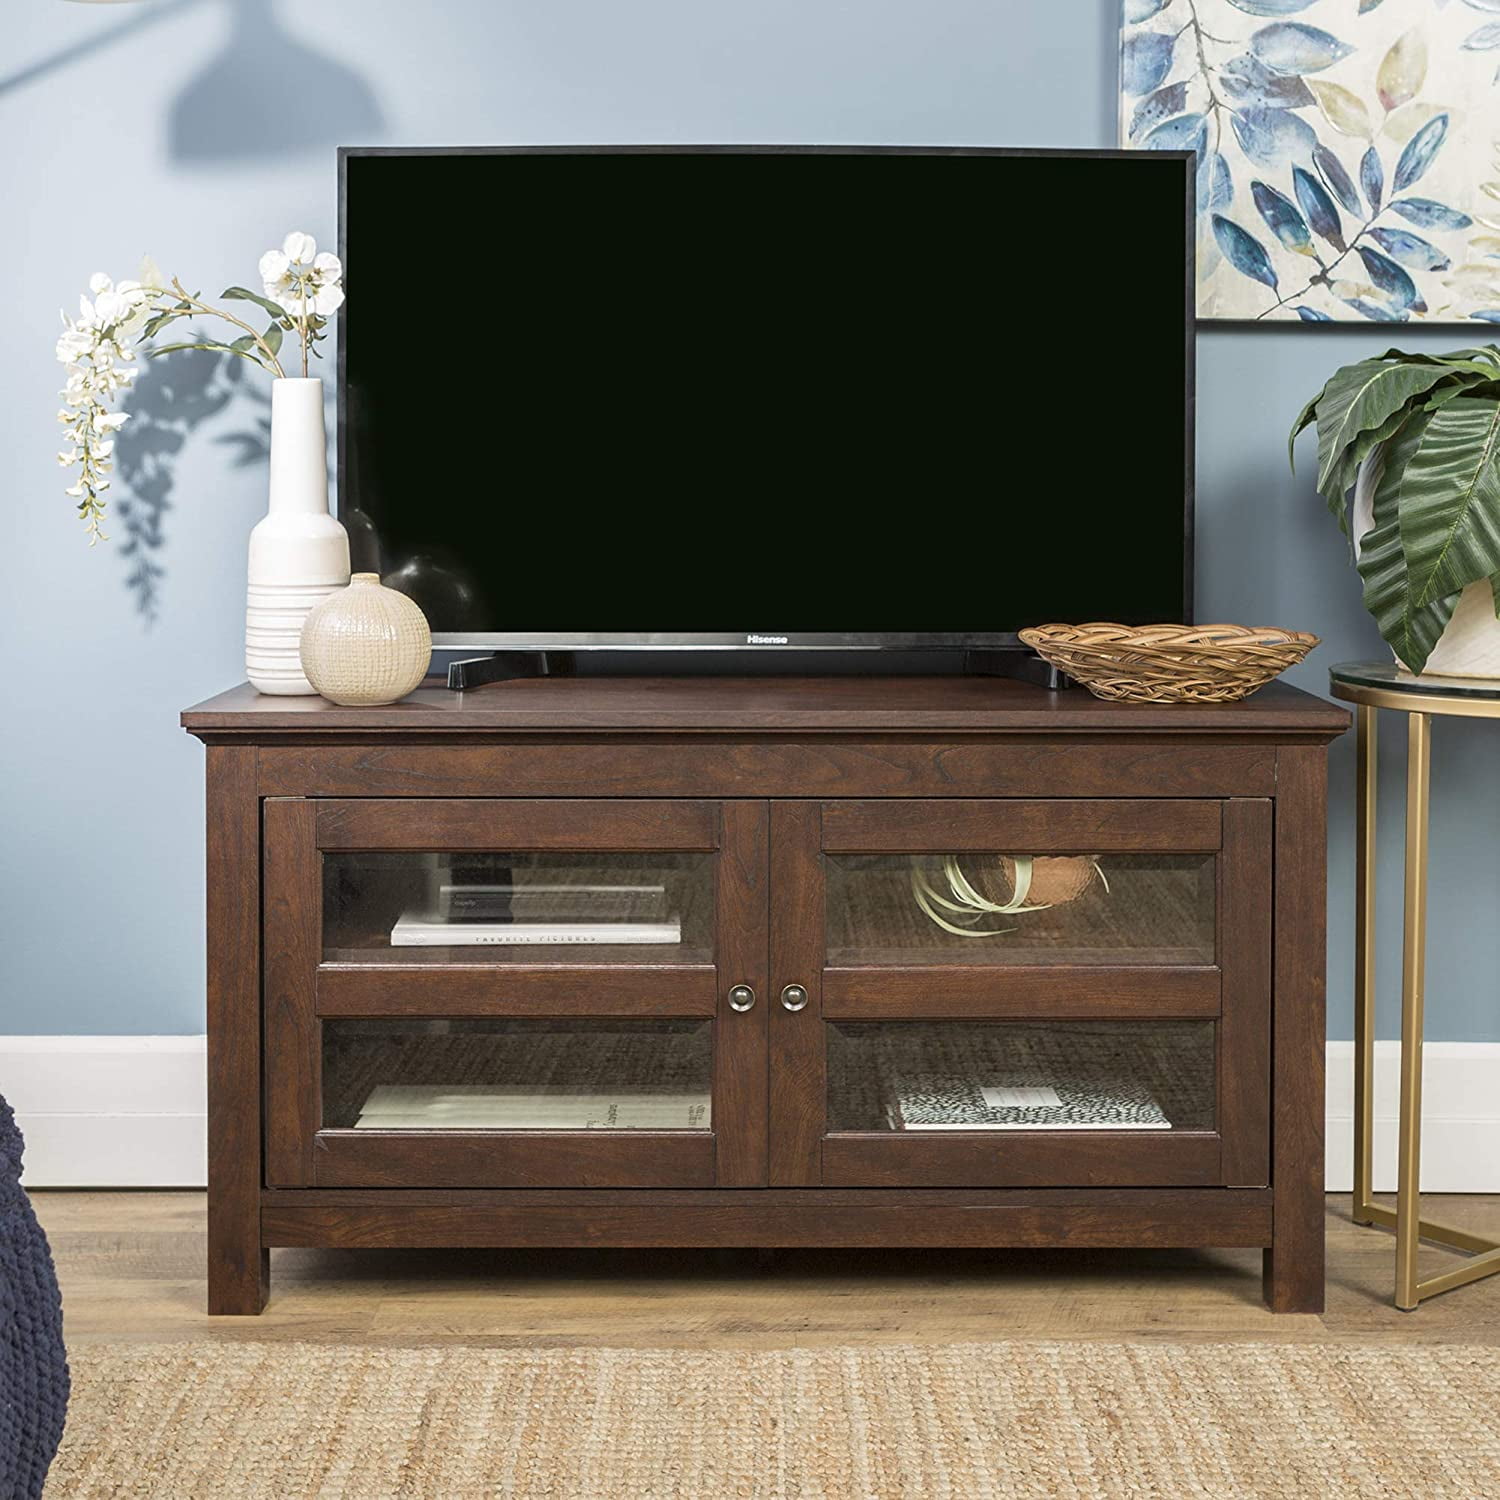 Simple Wood Universal Stand for TV's up to 50" Flat Screen ...